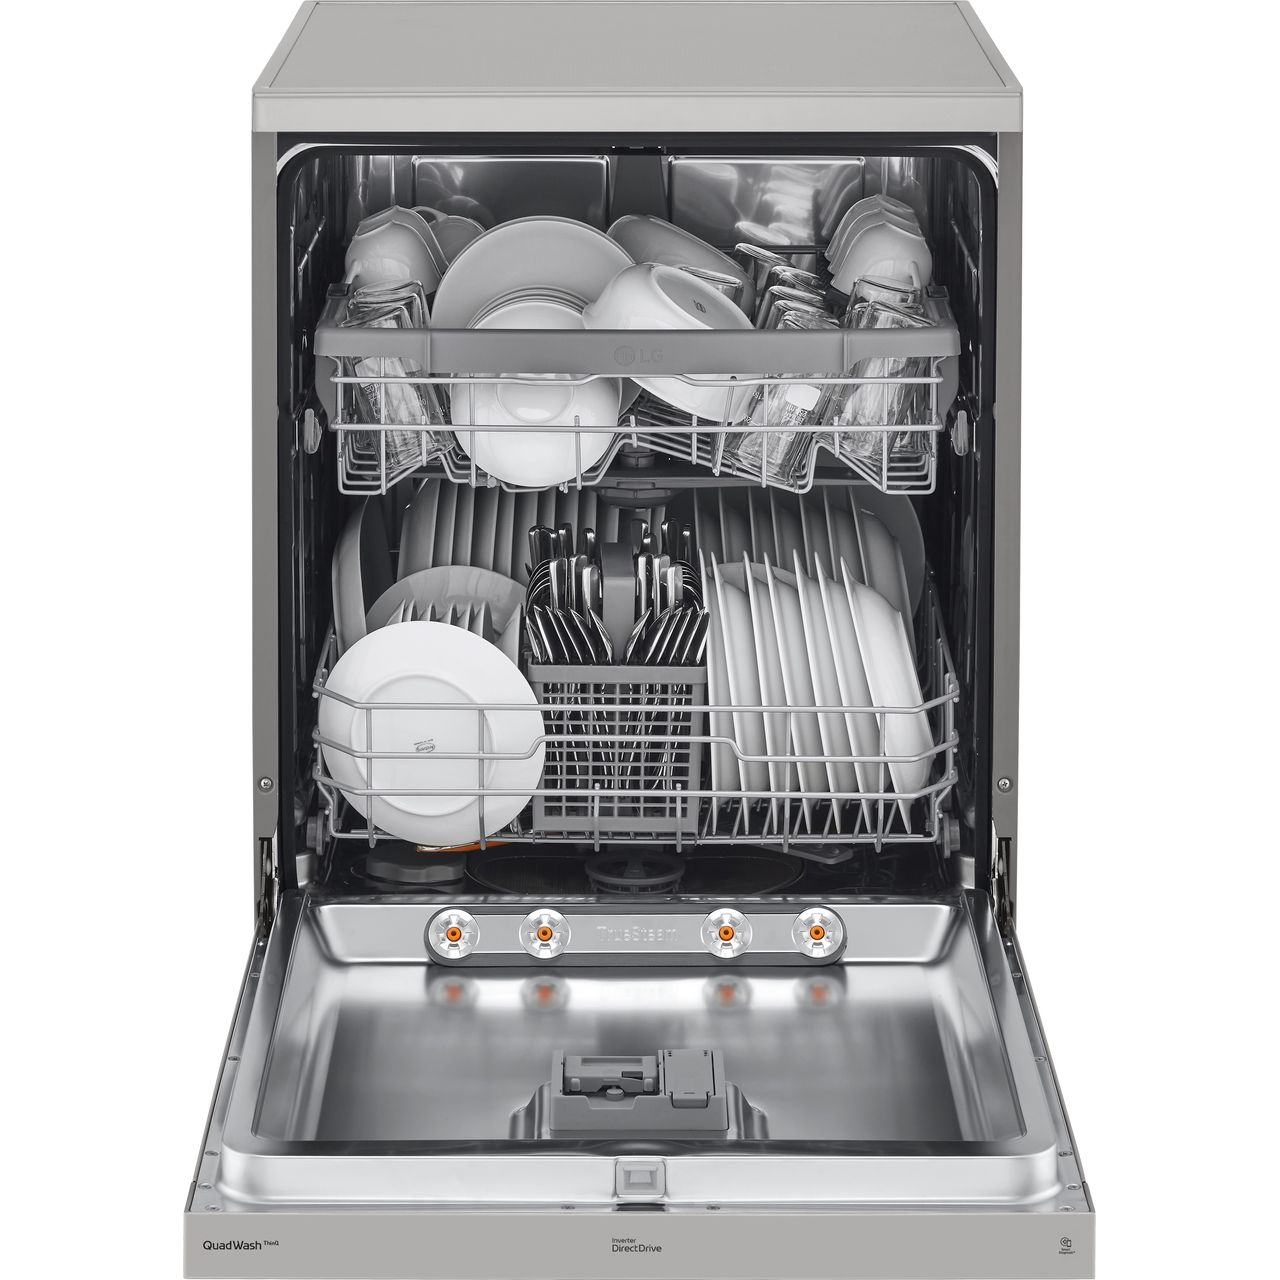 LG 1452LF TrueSteam Stainless-Steel Dishwasher for 220-240 Volts